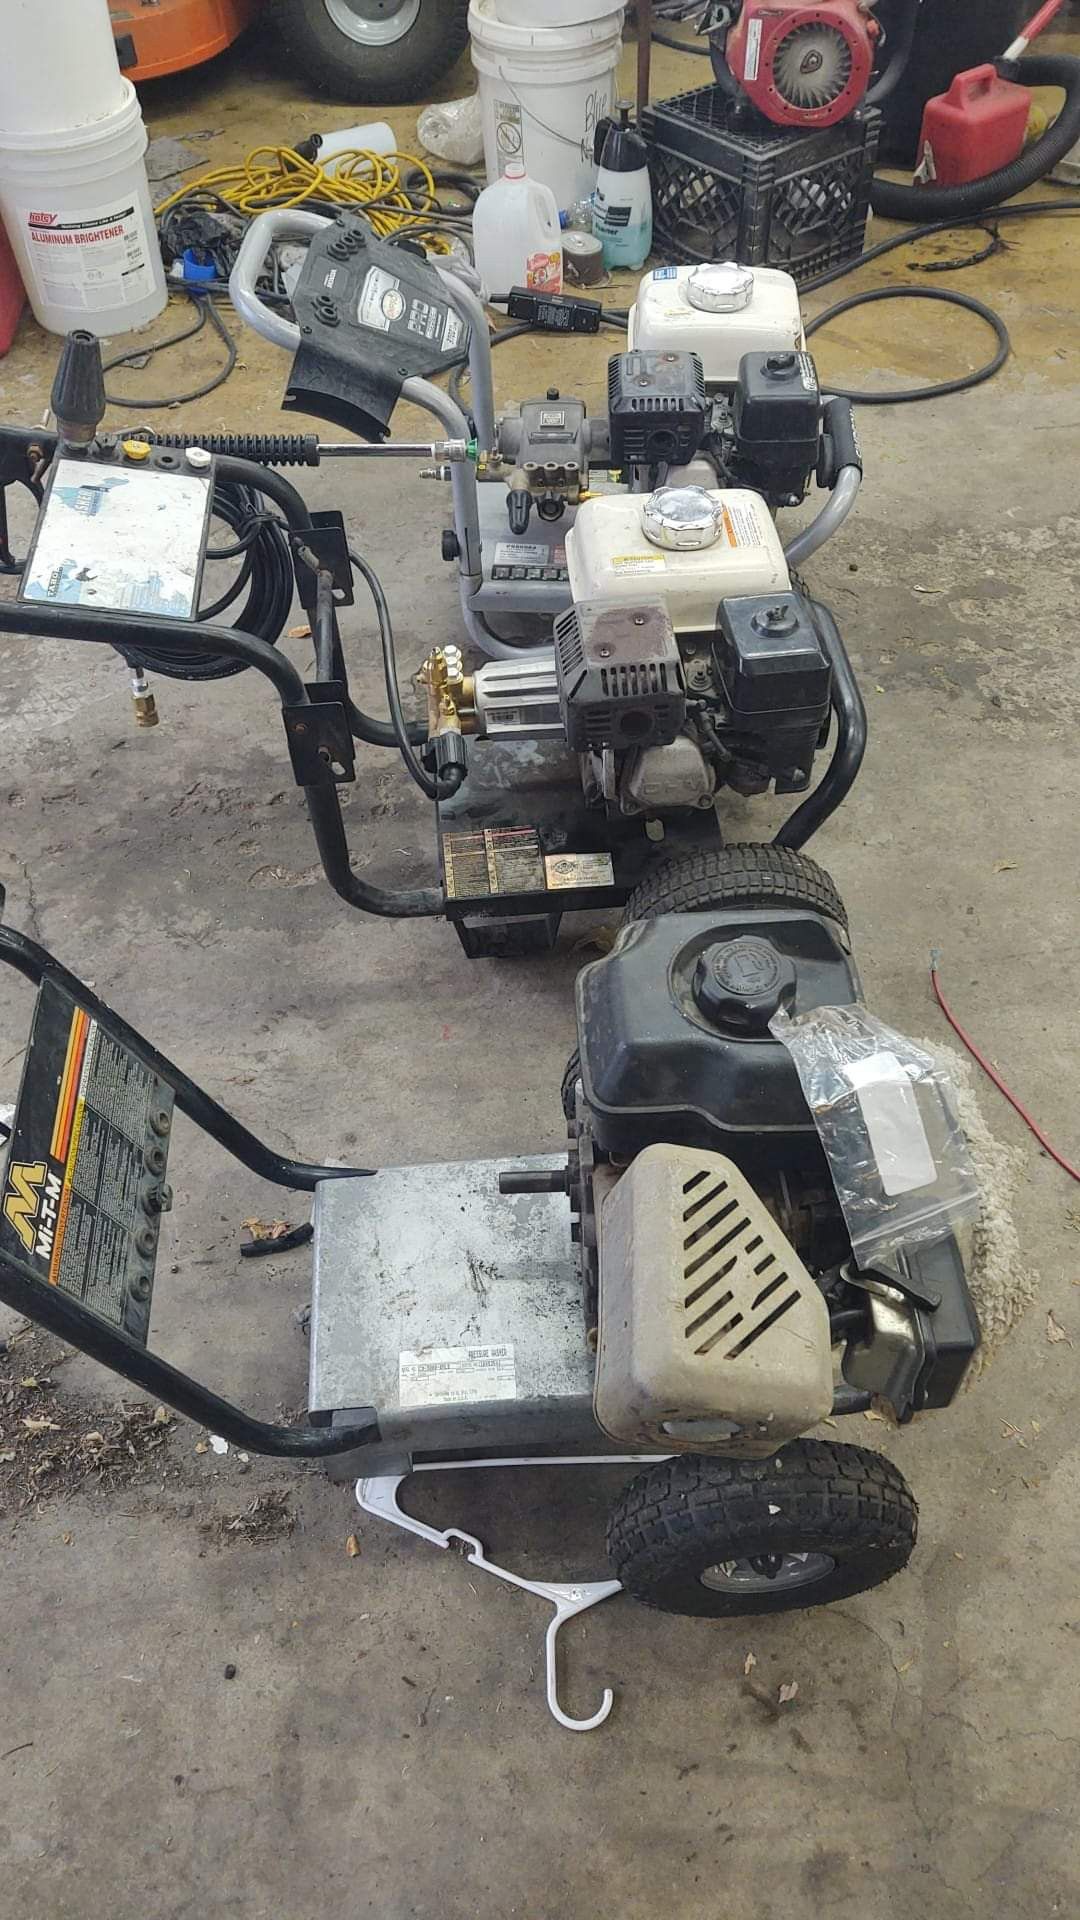 Pressure washers several to choose from.